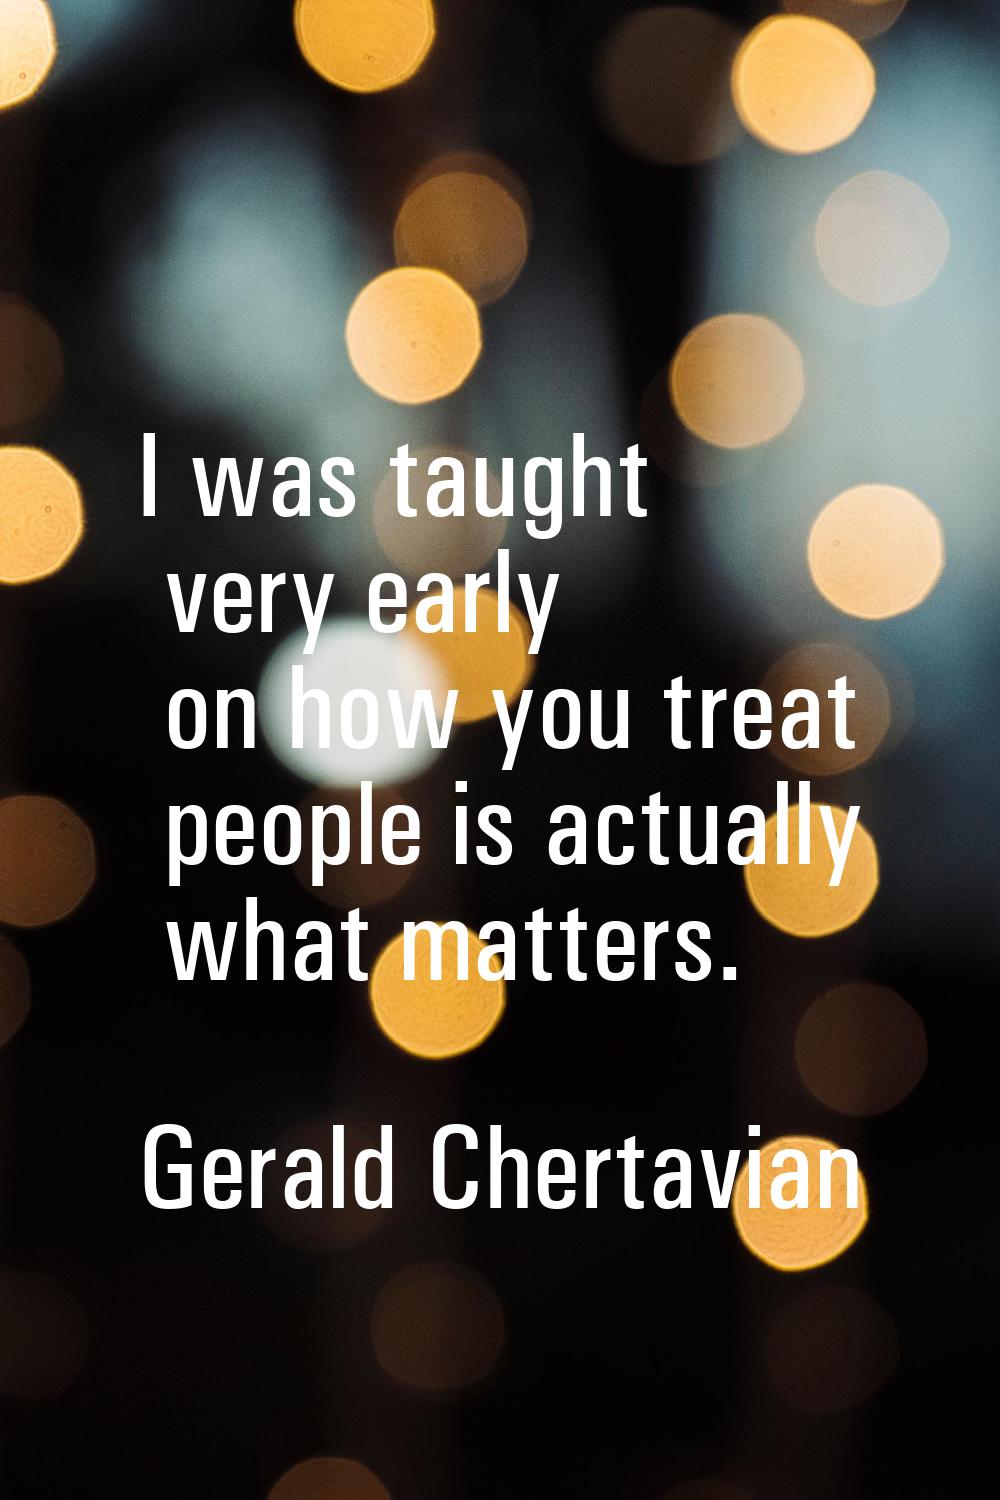 I was taught very early on how you treat people is actually what matters.